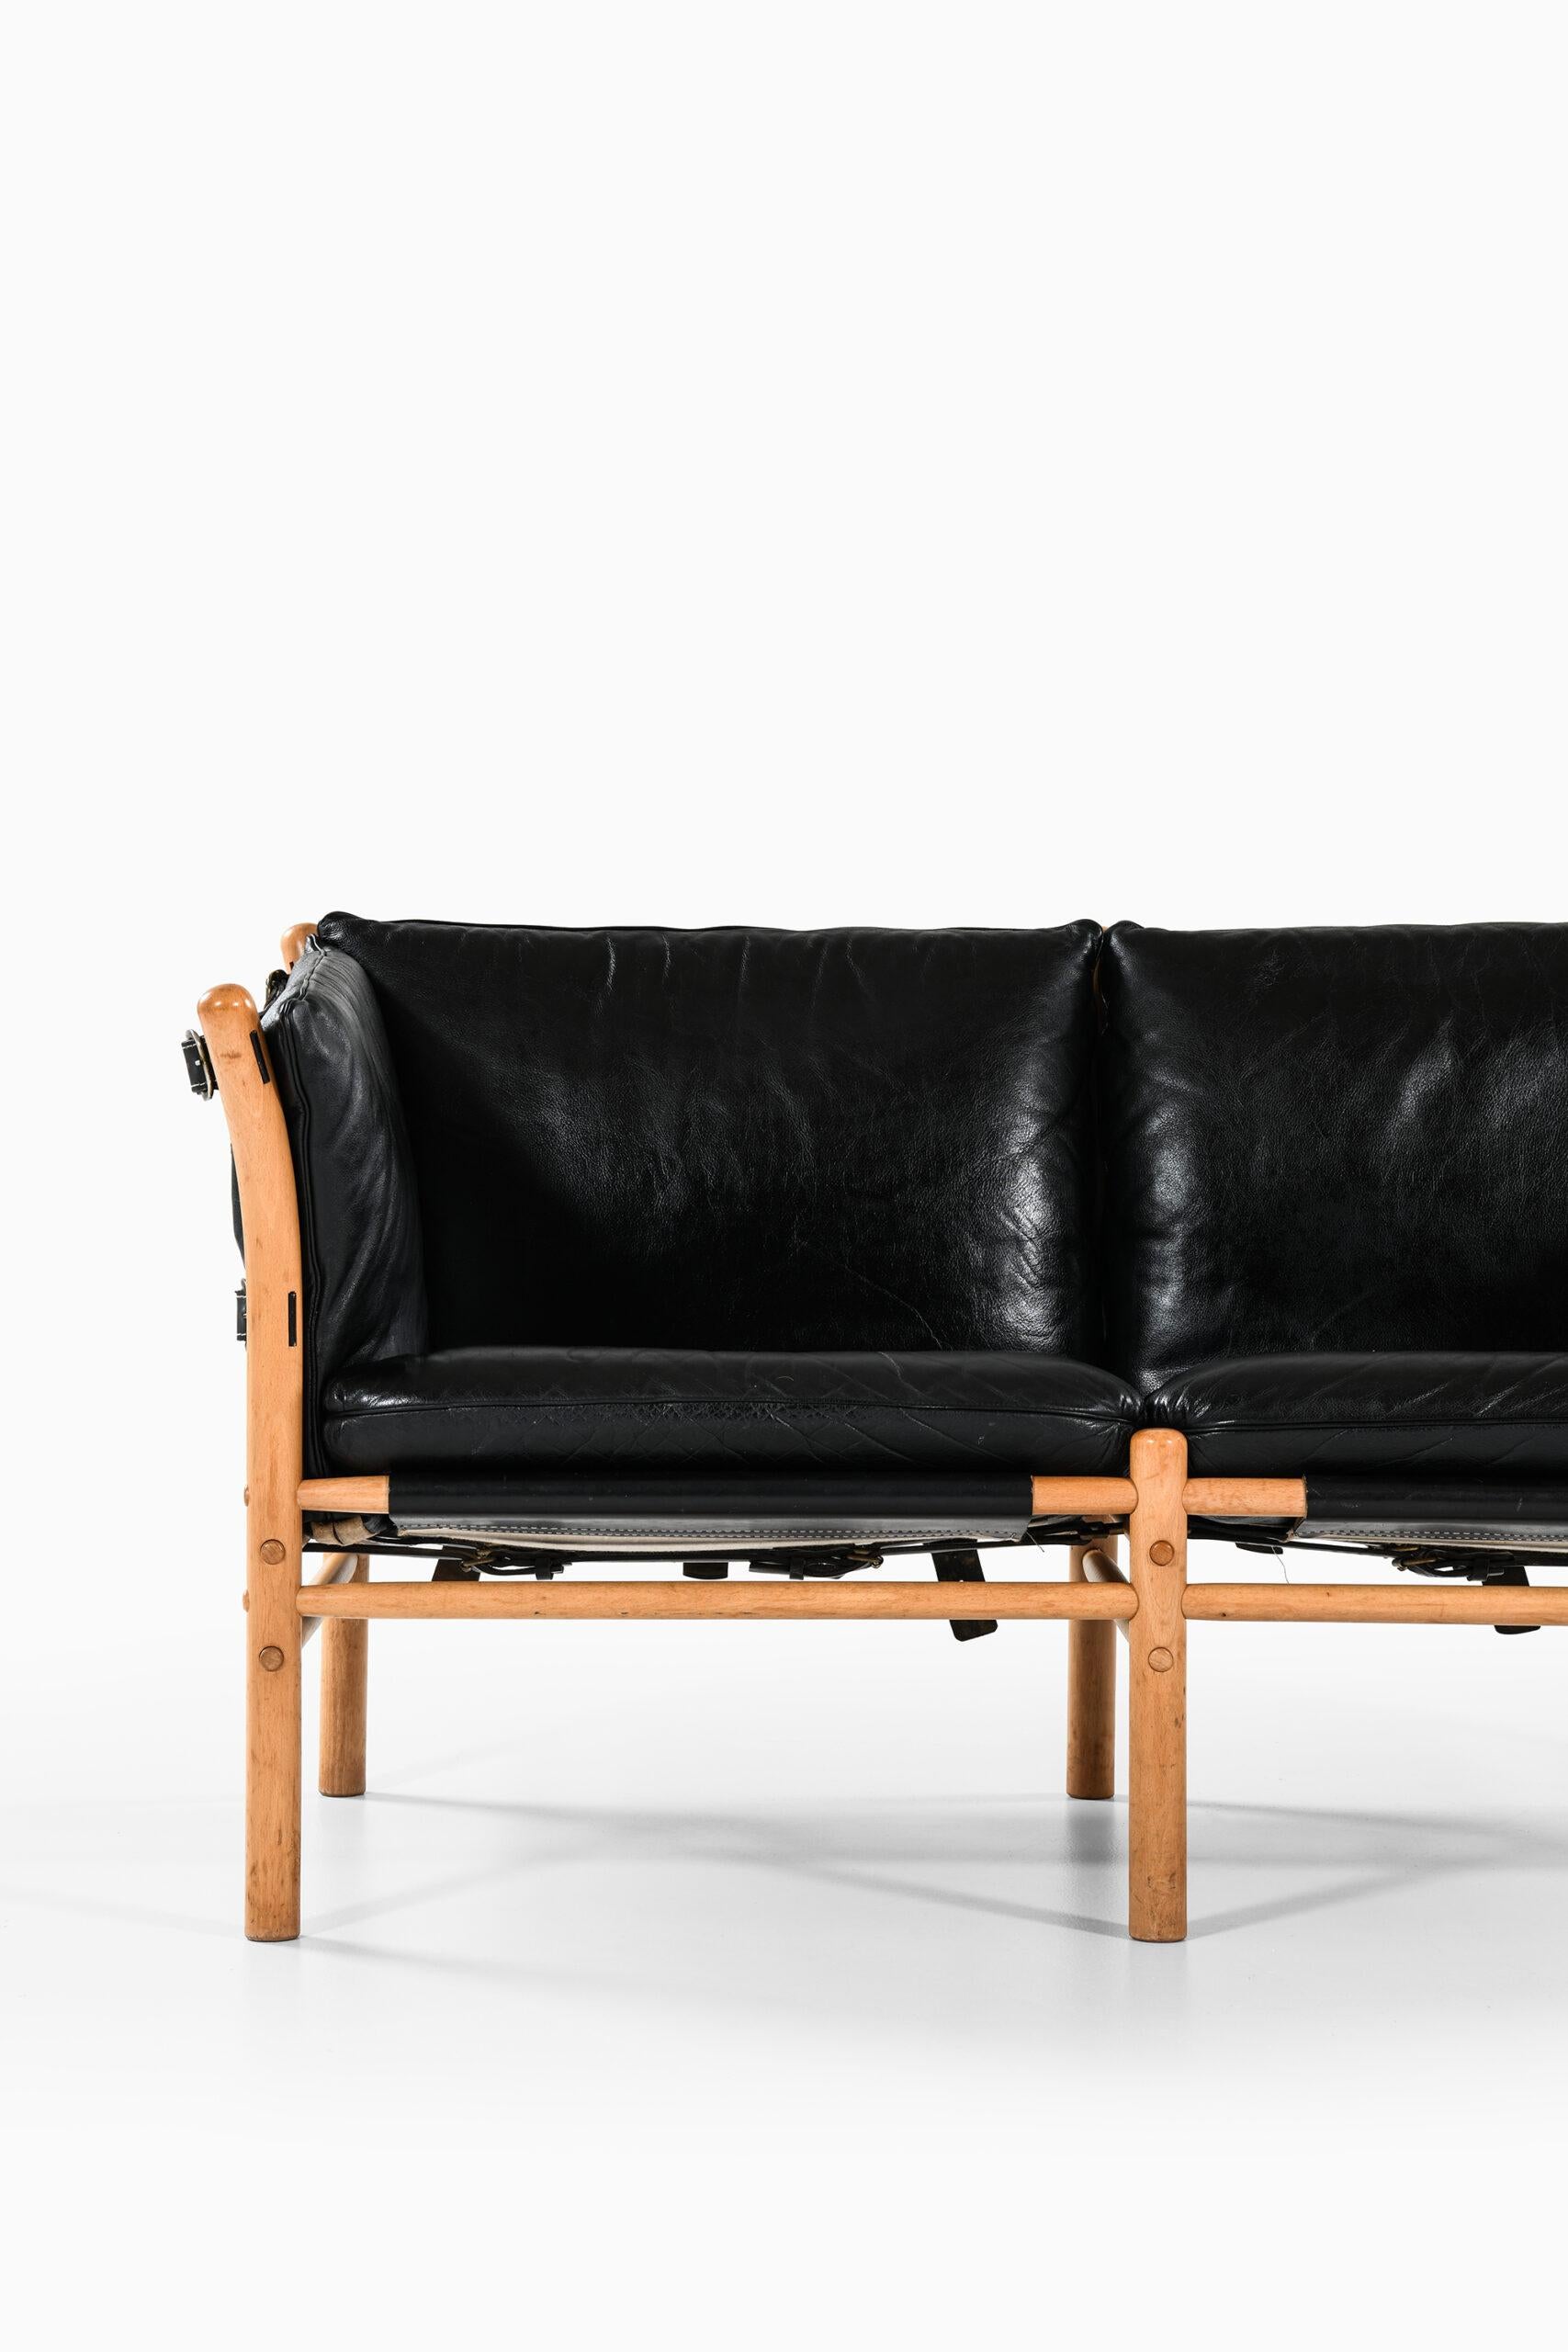 2-seat sofa model Ilona designed by Arne Norell. Produced by Arne Norell AB in Aneby, Sweden.
 